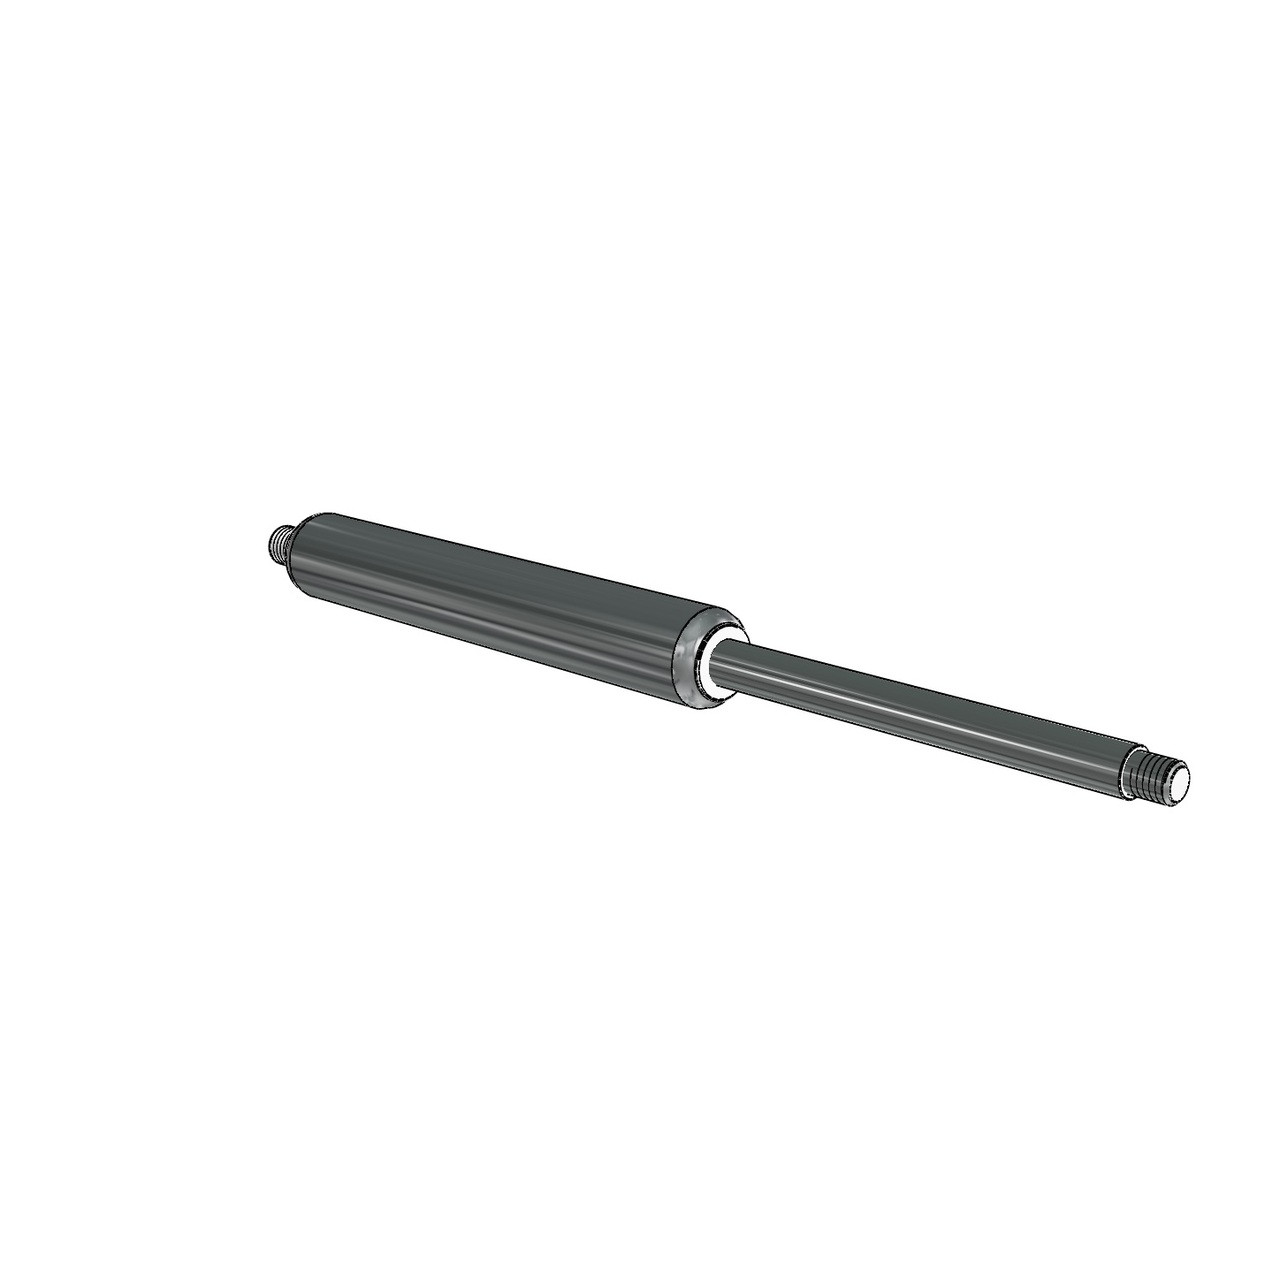 H0N0F42-250-547/XXXN Gas Spring 10(250mm) Stroke 22(547mm) Extended  Length Customer Selected Force